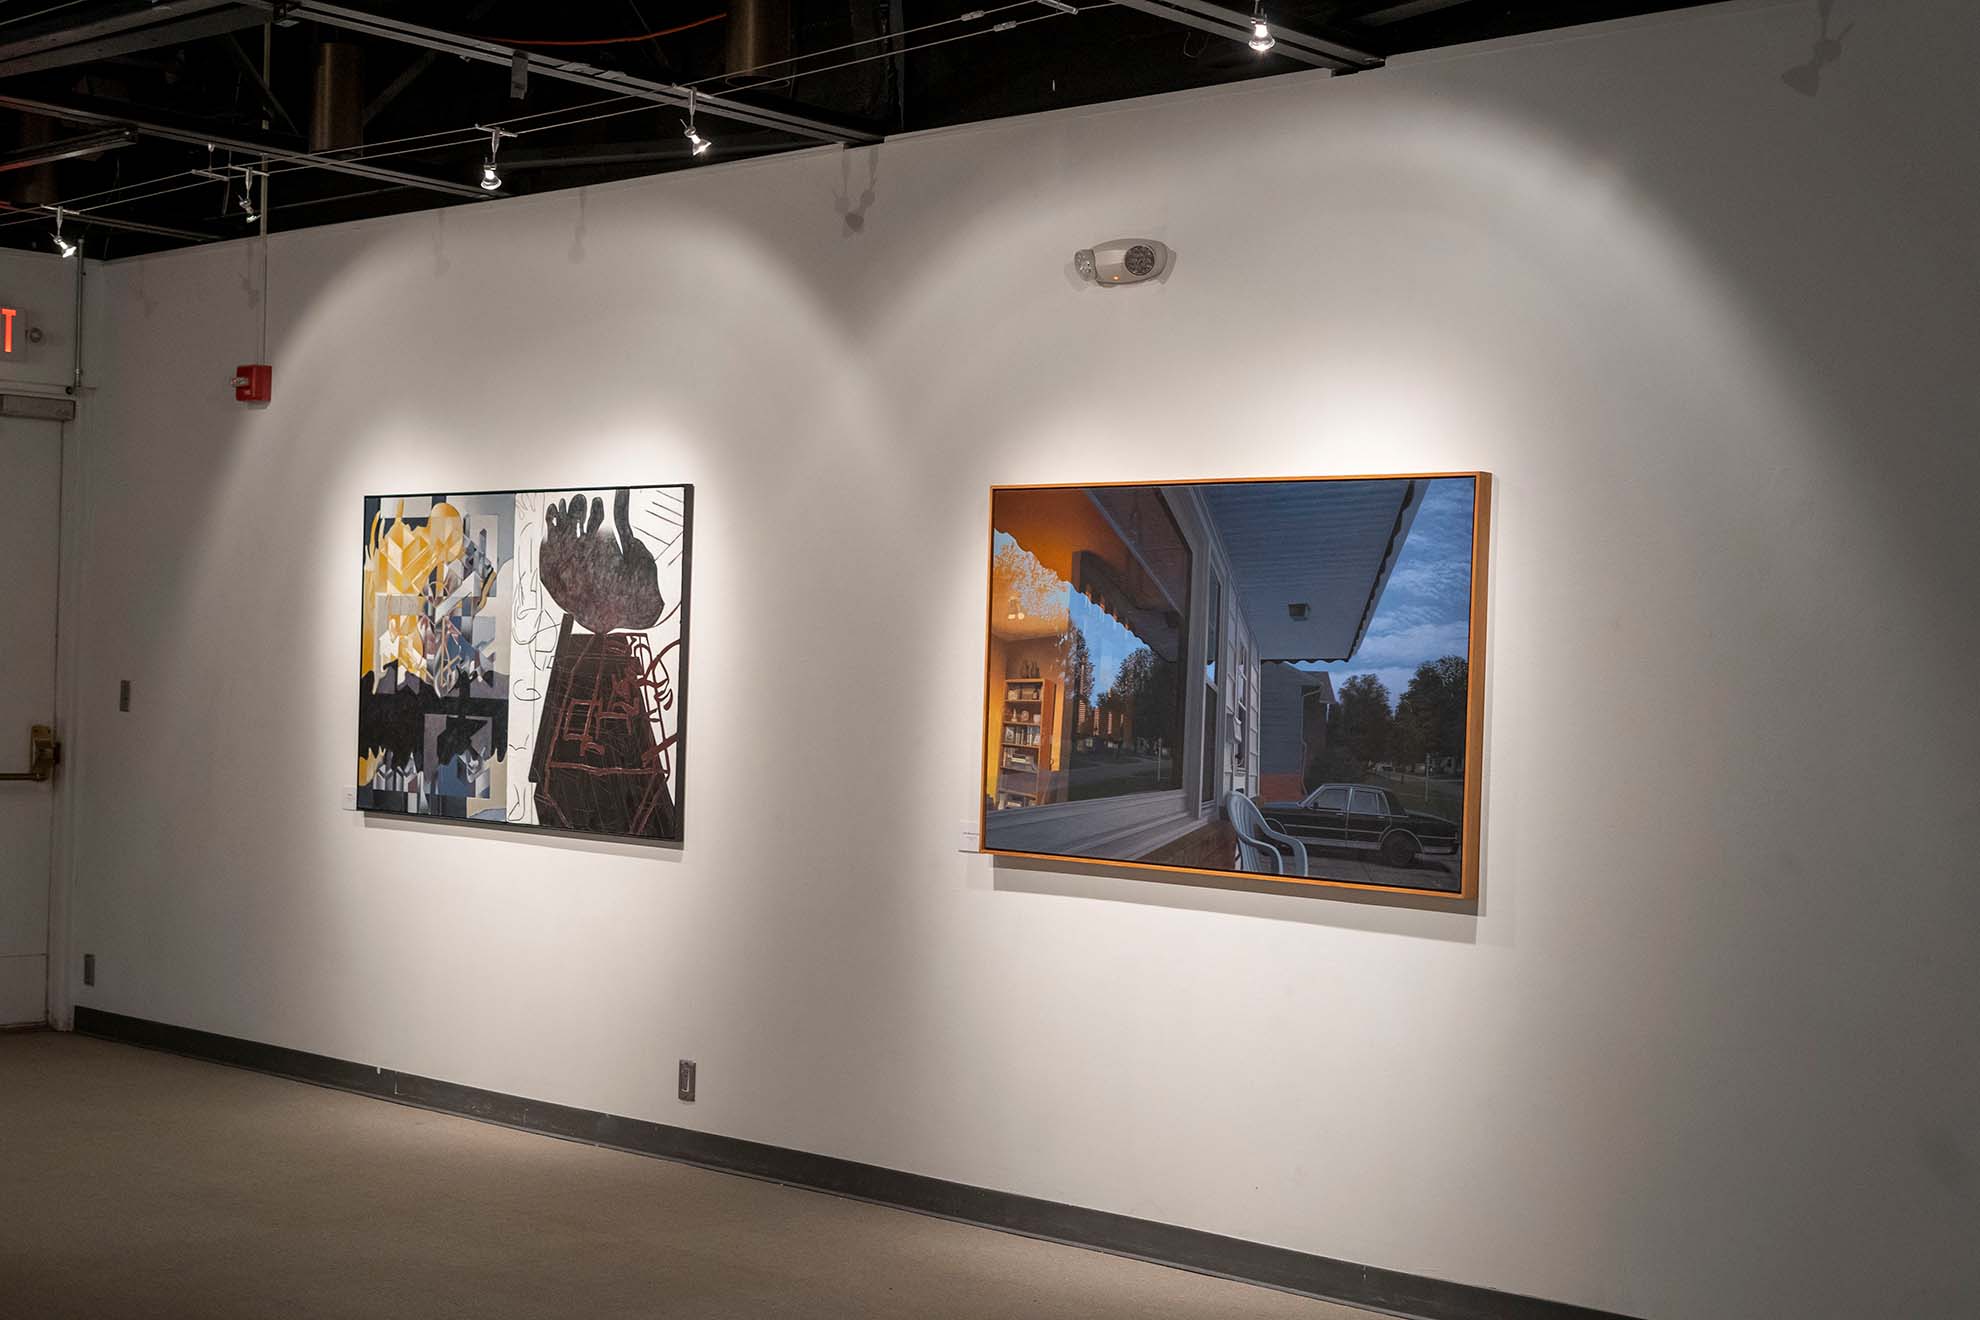 The exhibition features both abstract and realistic paintings.